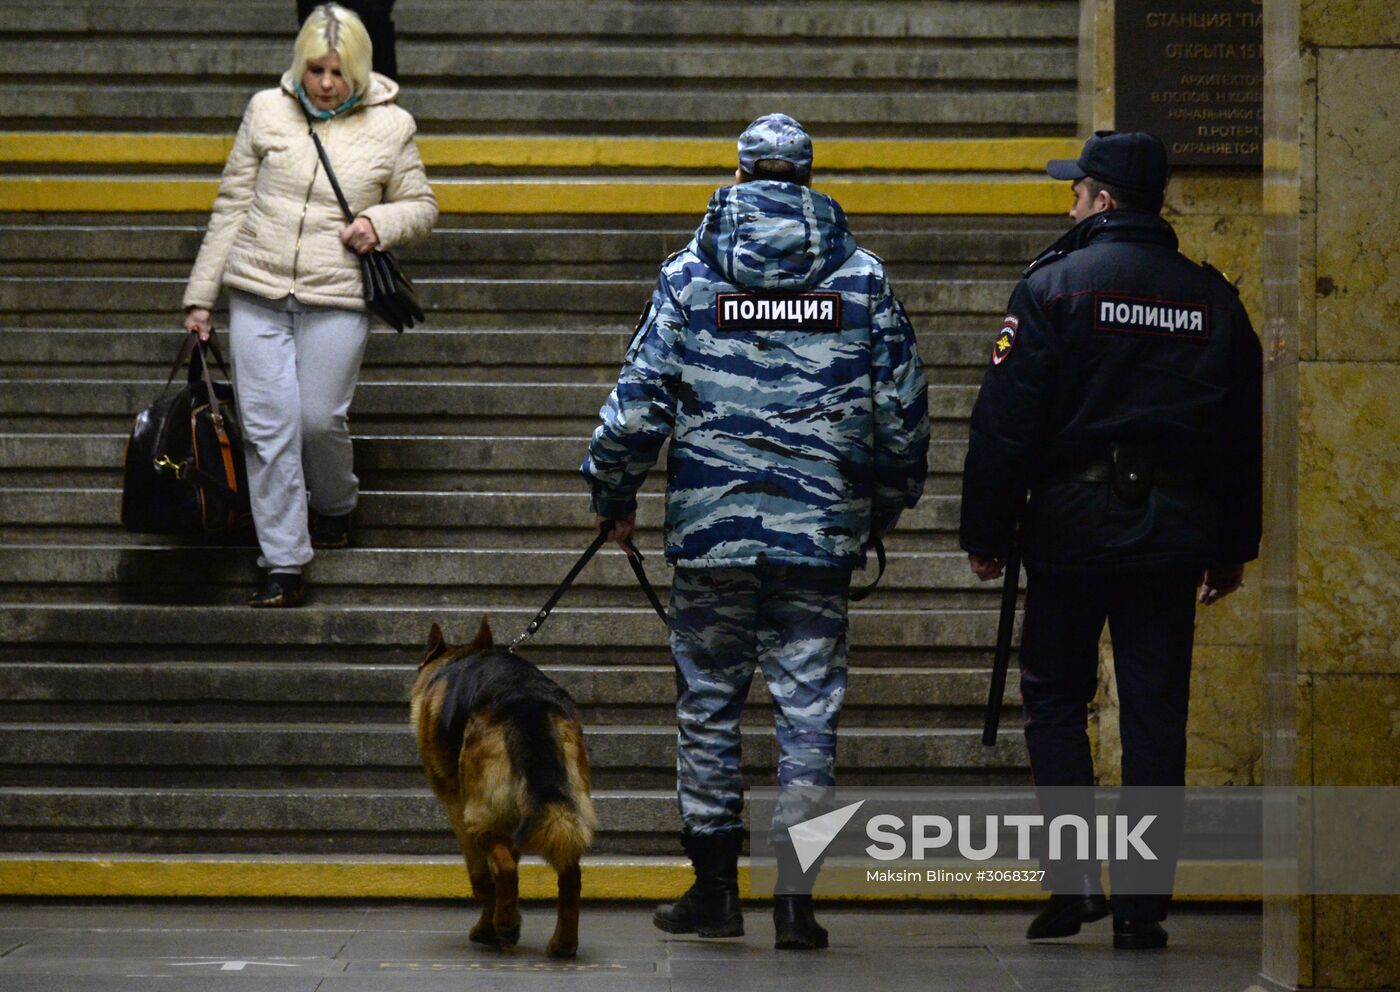 Security measures in Moscow metro